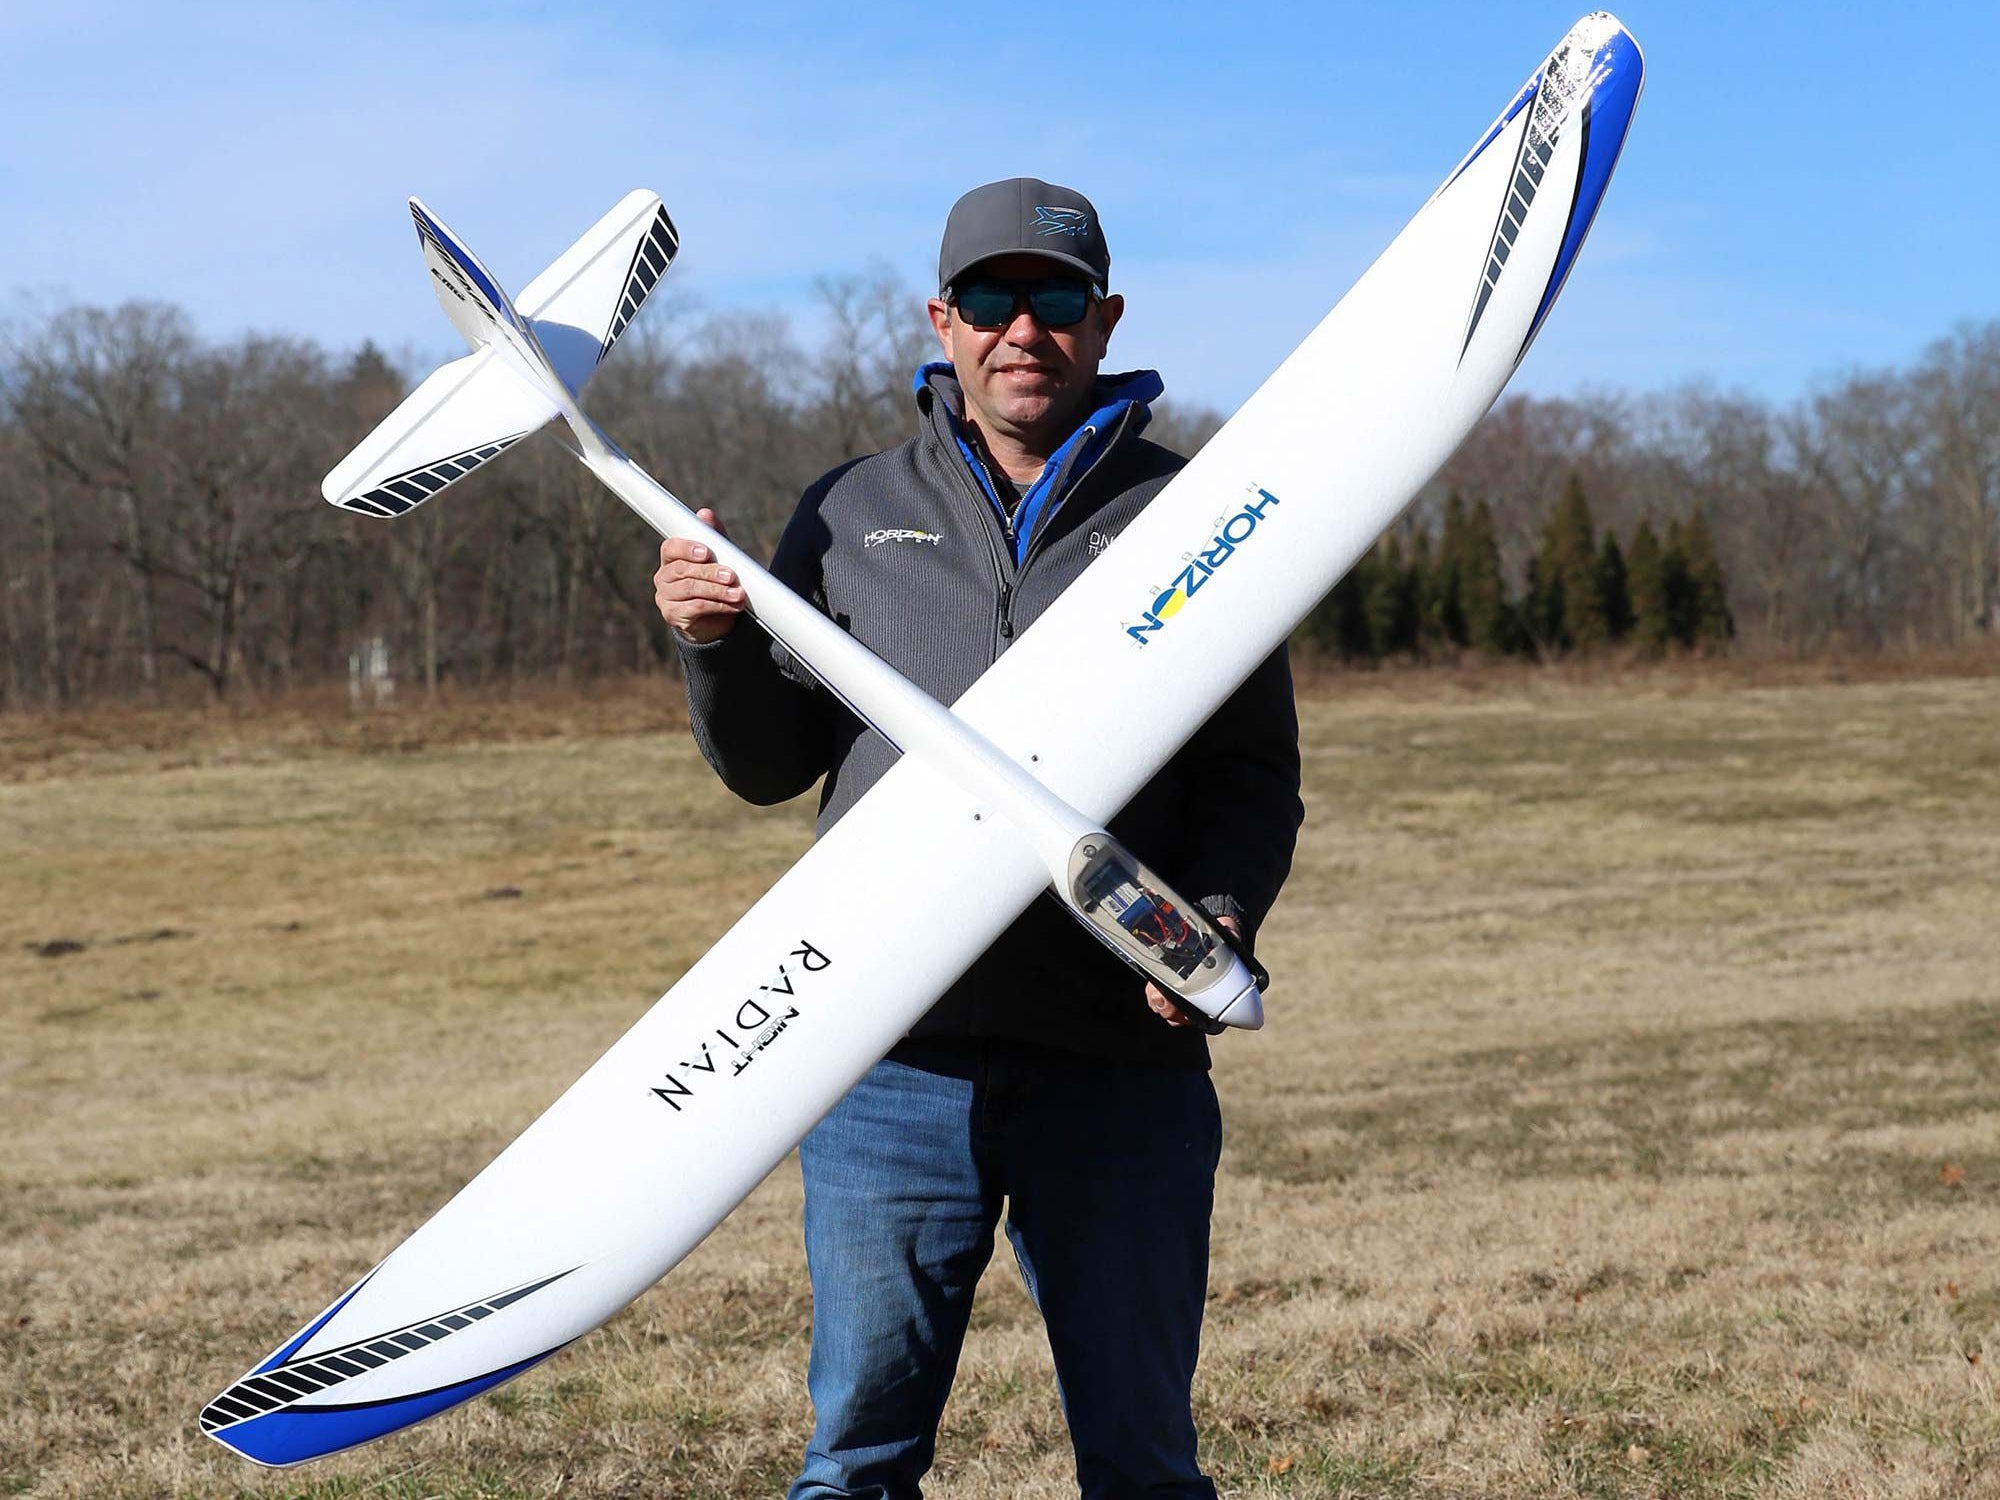 NEW E-Flite Night Radian FT 2.0m BNF Basic with AS3X SAFE & Smart  Select EFL36500